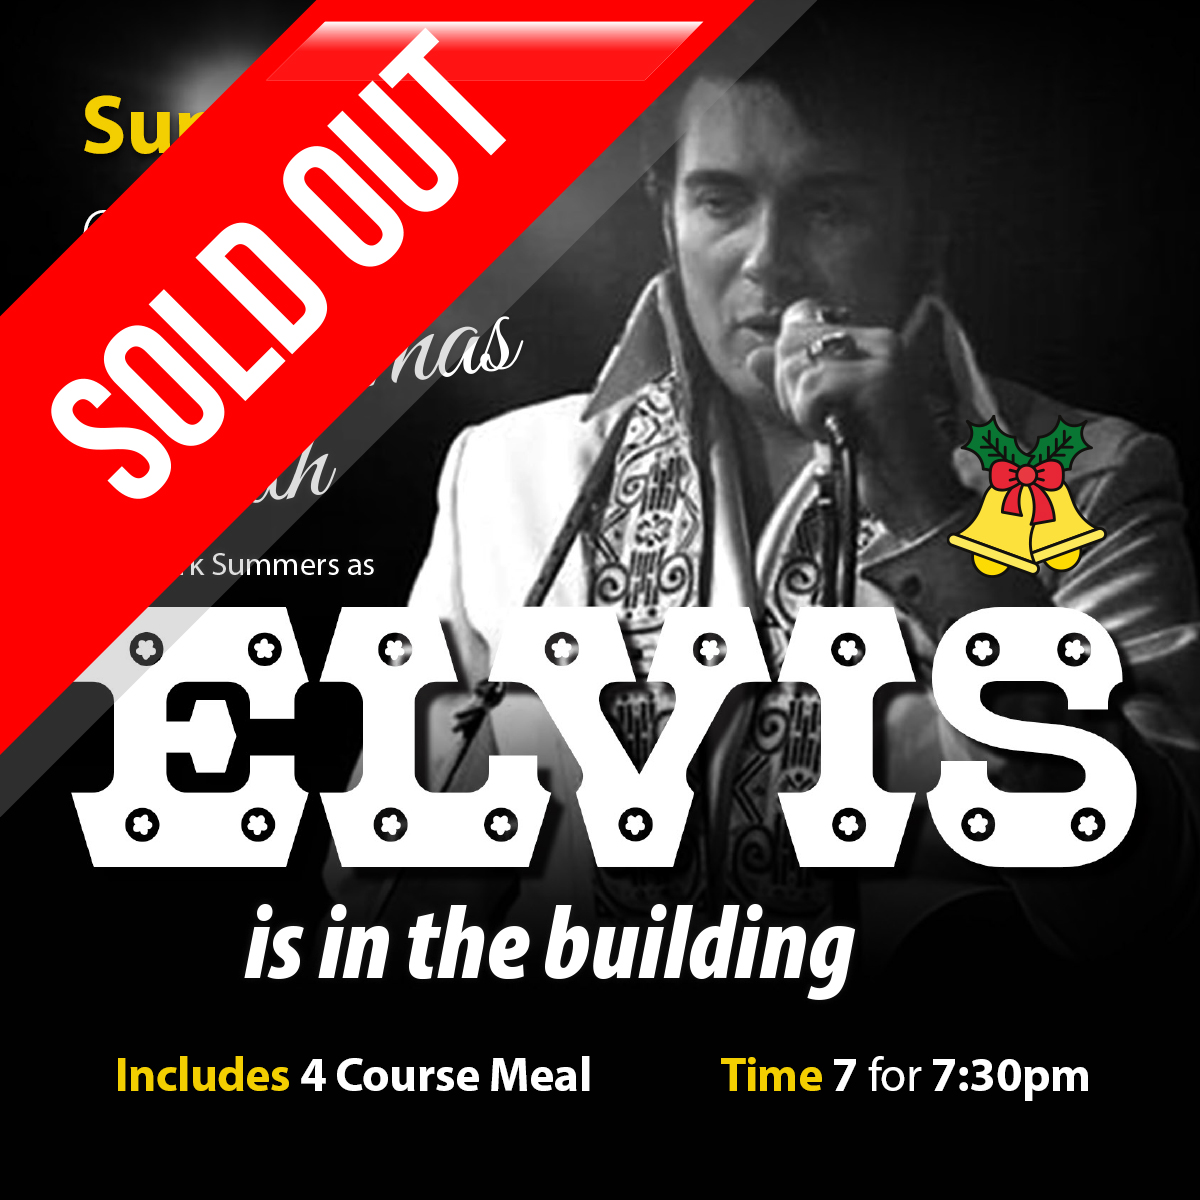 Mark Summers as Elvis **SOLD OUT**